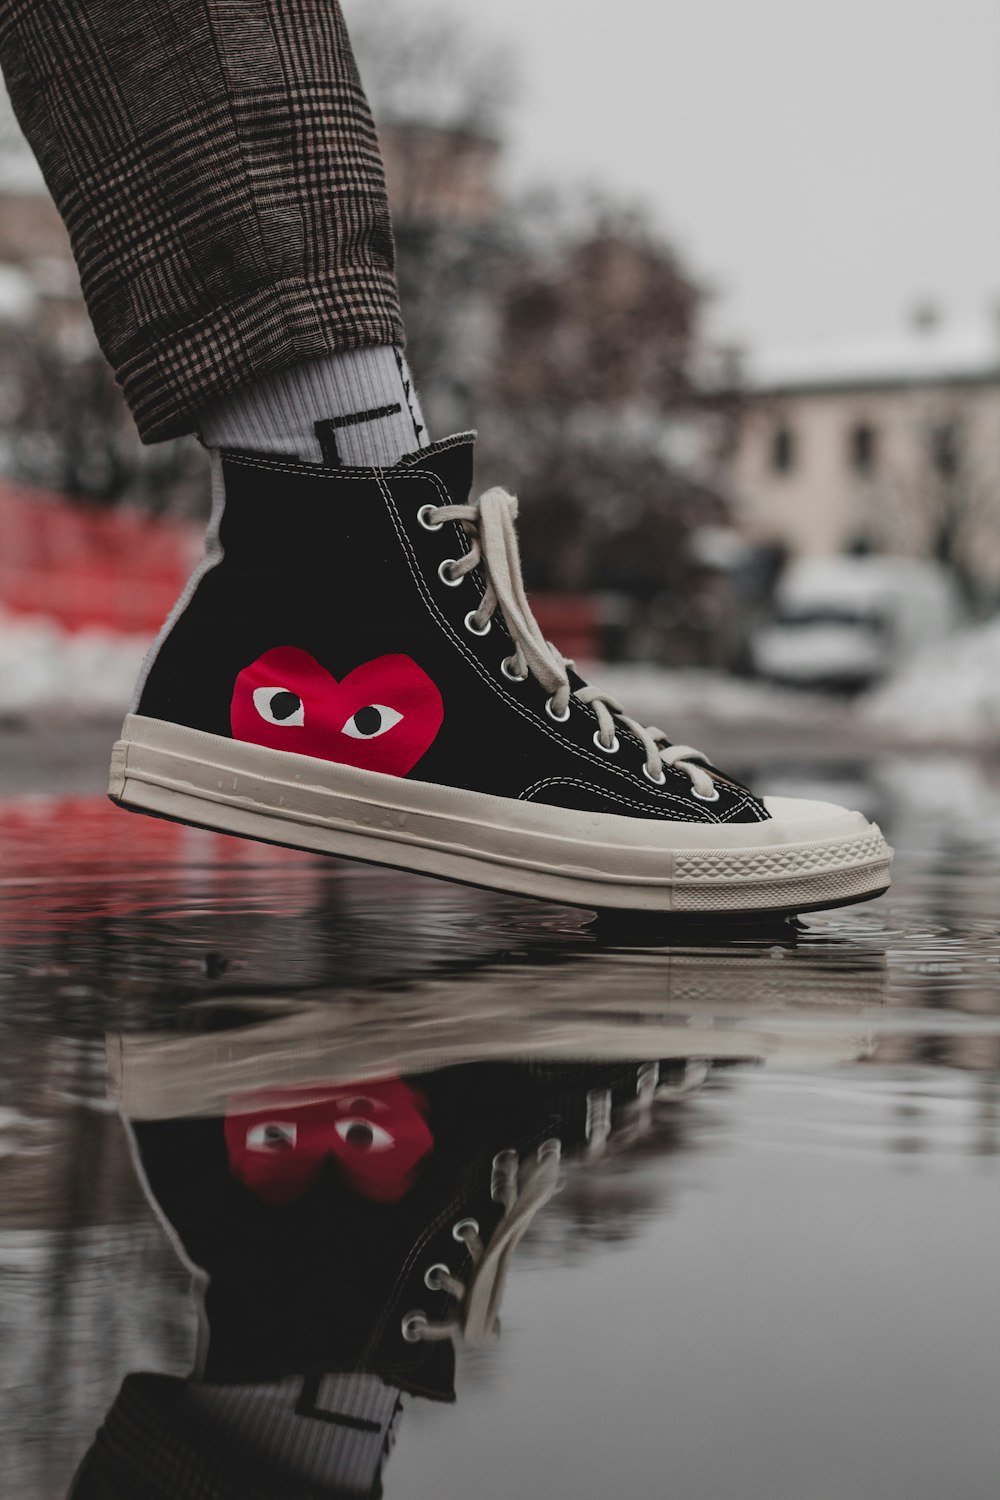 person wearing black and white converse all star high top sneakers photo –  Free Converse Image on Unsplash